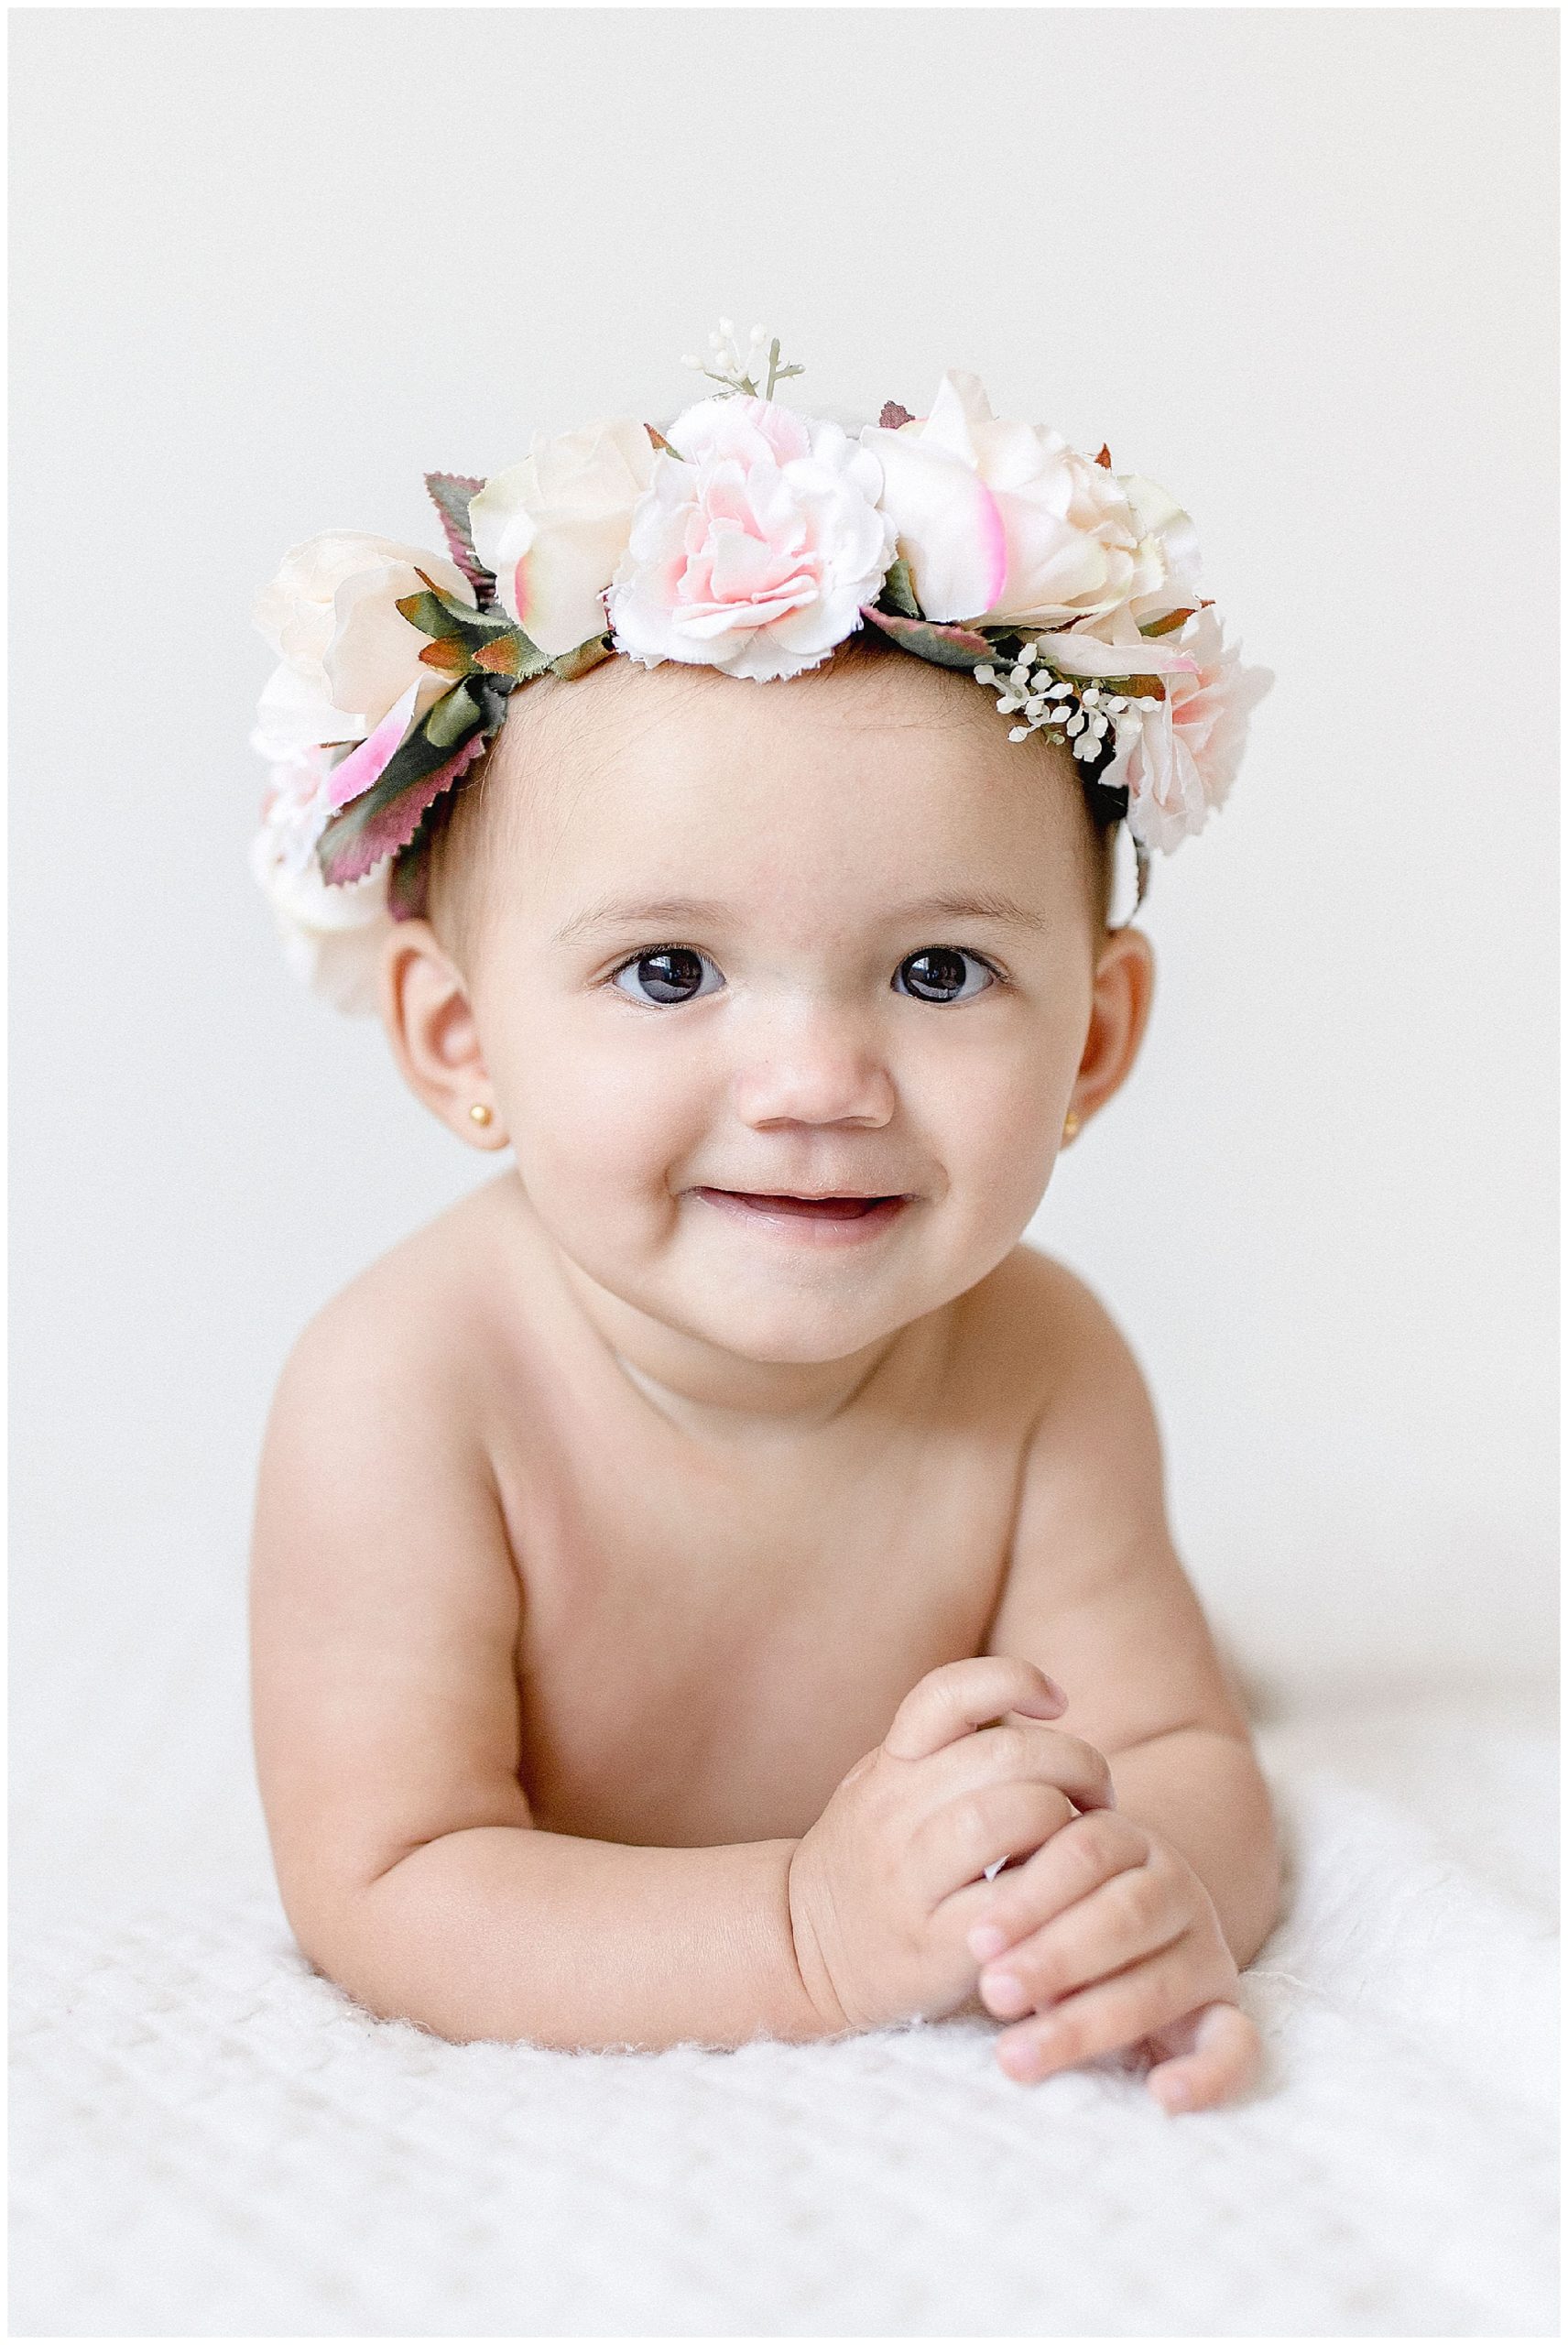 Baby girl with flower crown. Photos by Ivanna Vidal Photography.